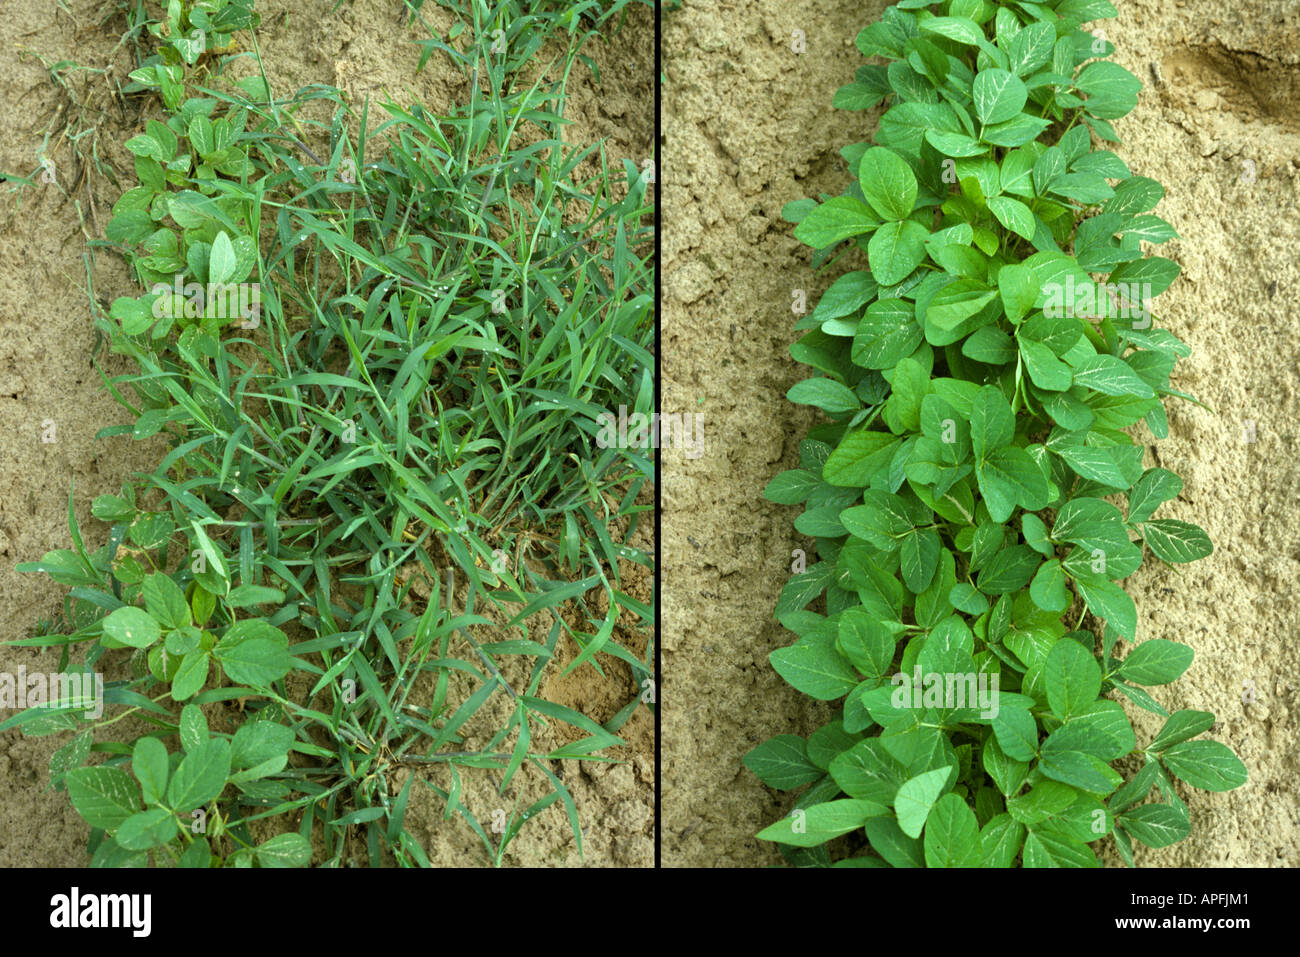 Comparison of weed control competition and soybean growth with treated and untreated crop Stock Photo